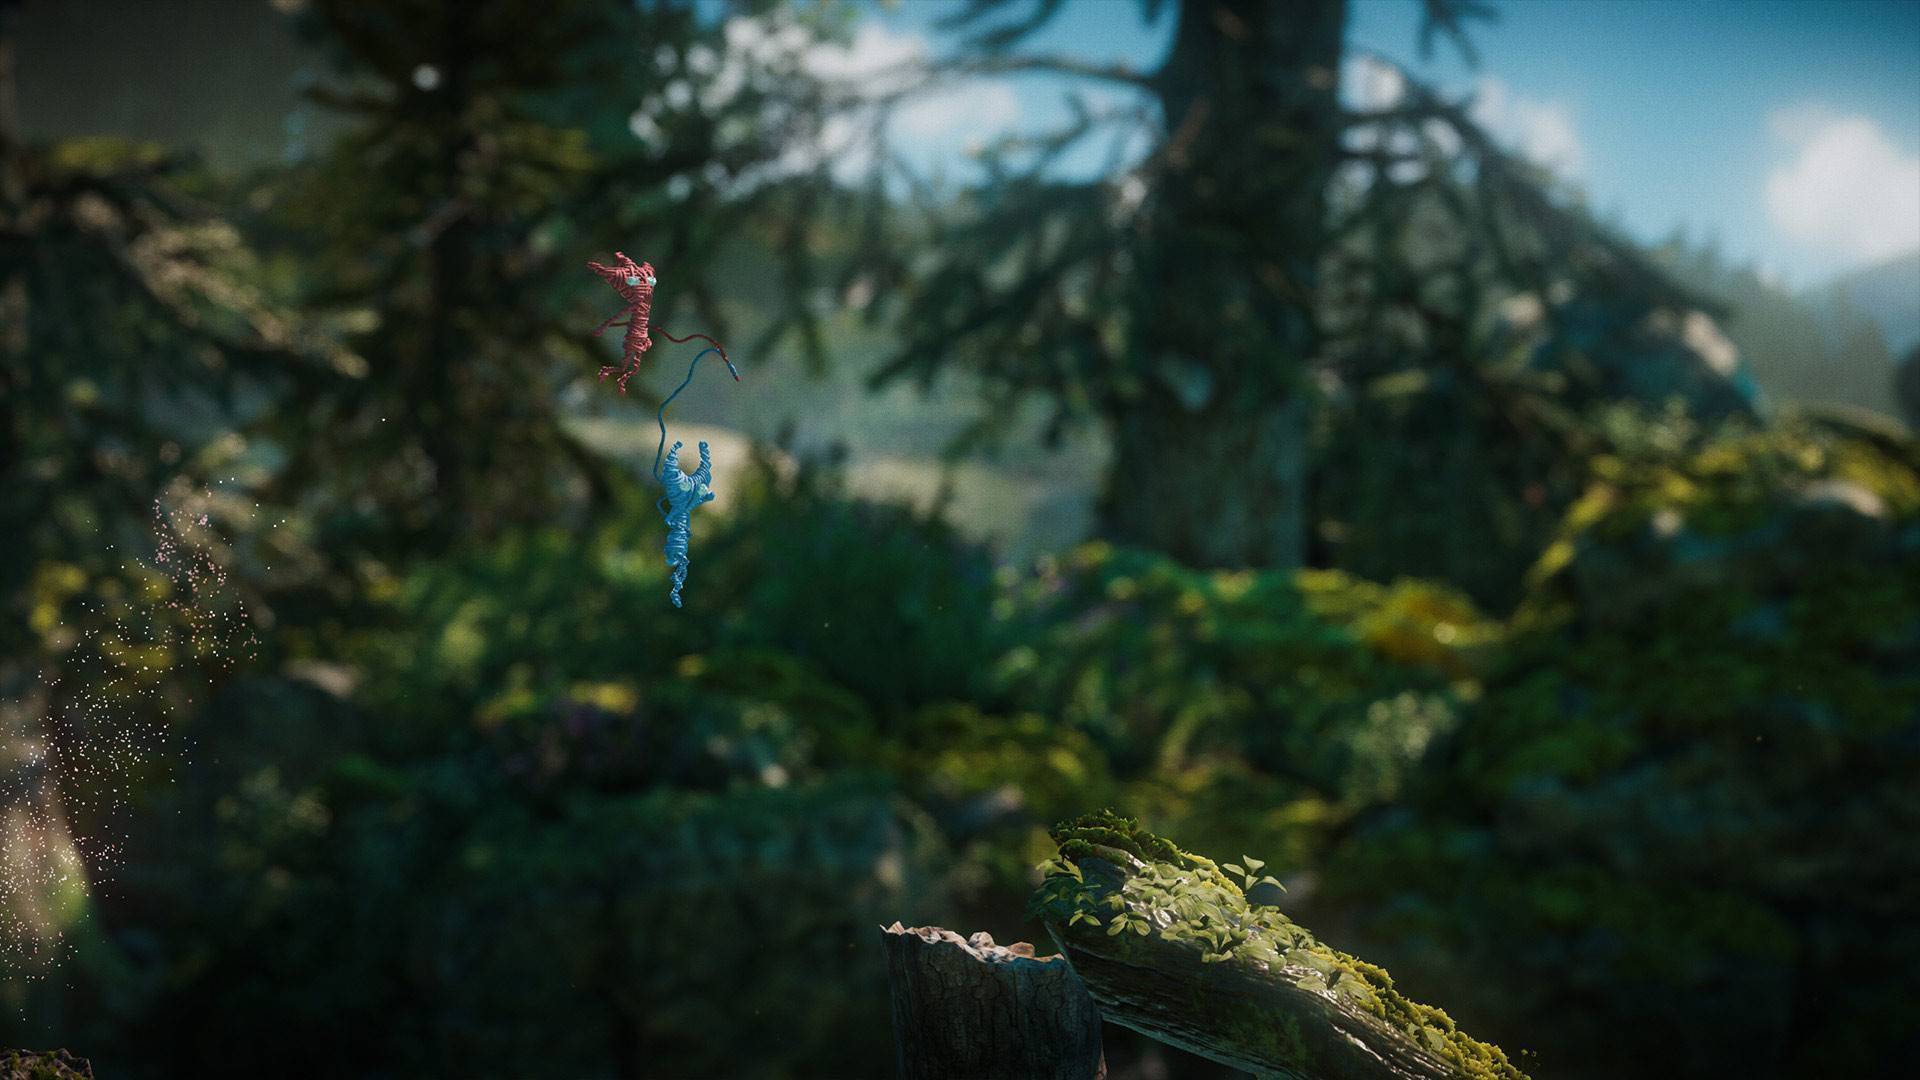 Unravel Two (Nintendo Switch) NEW